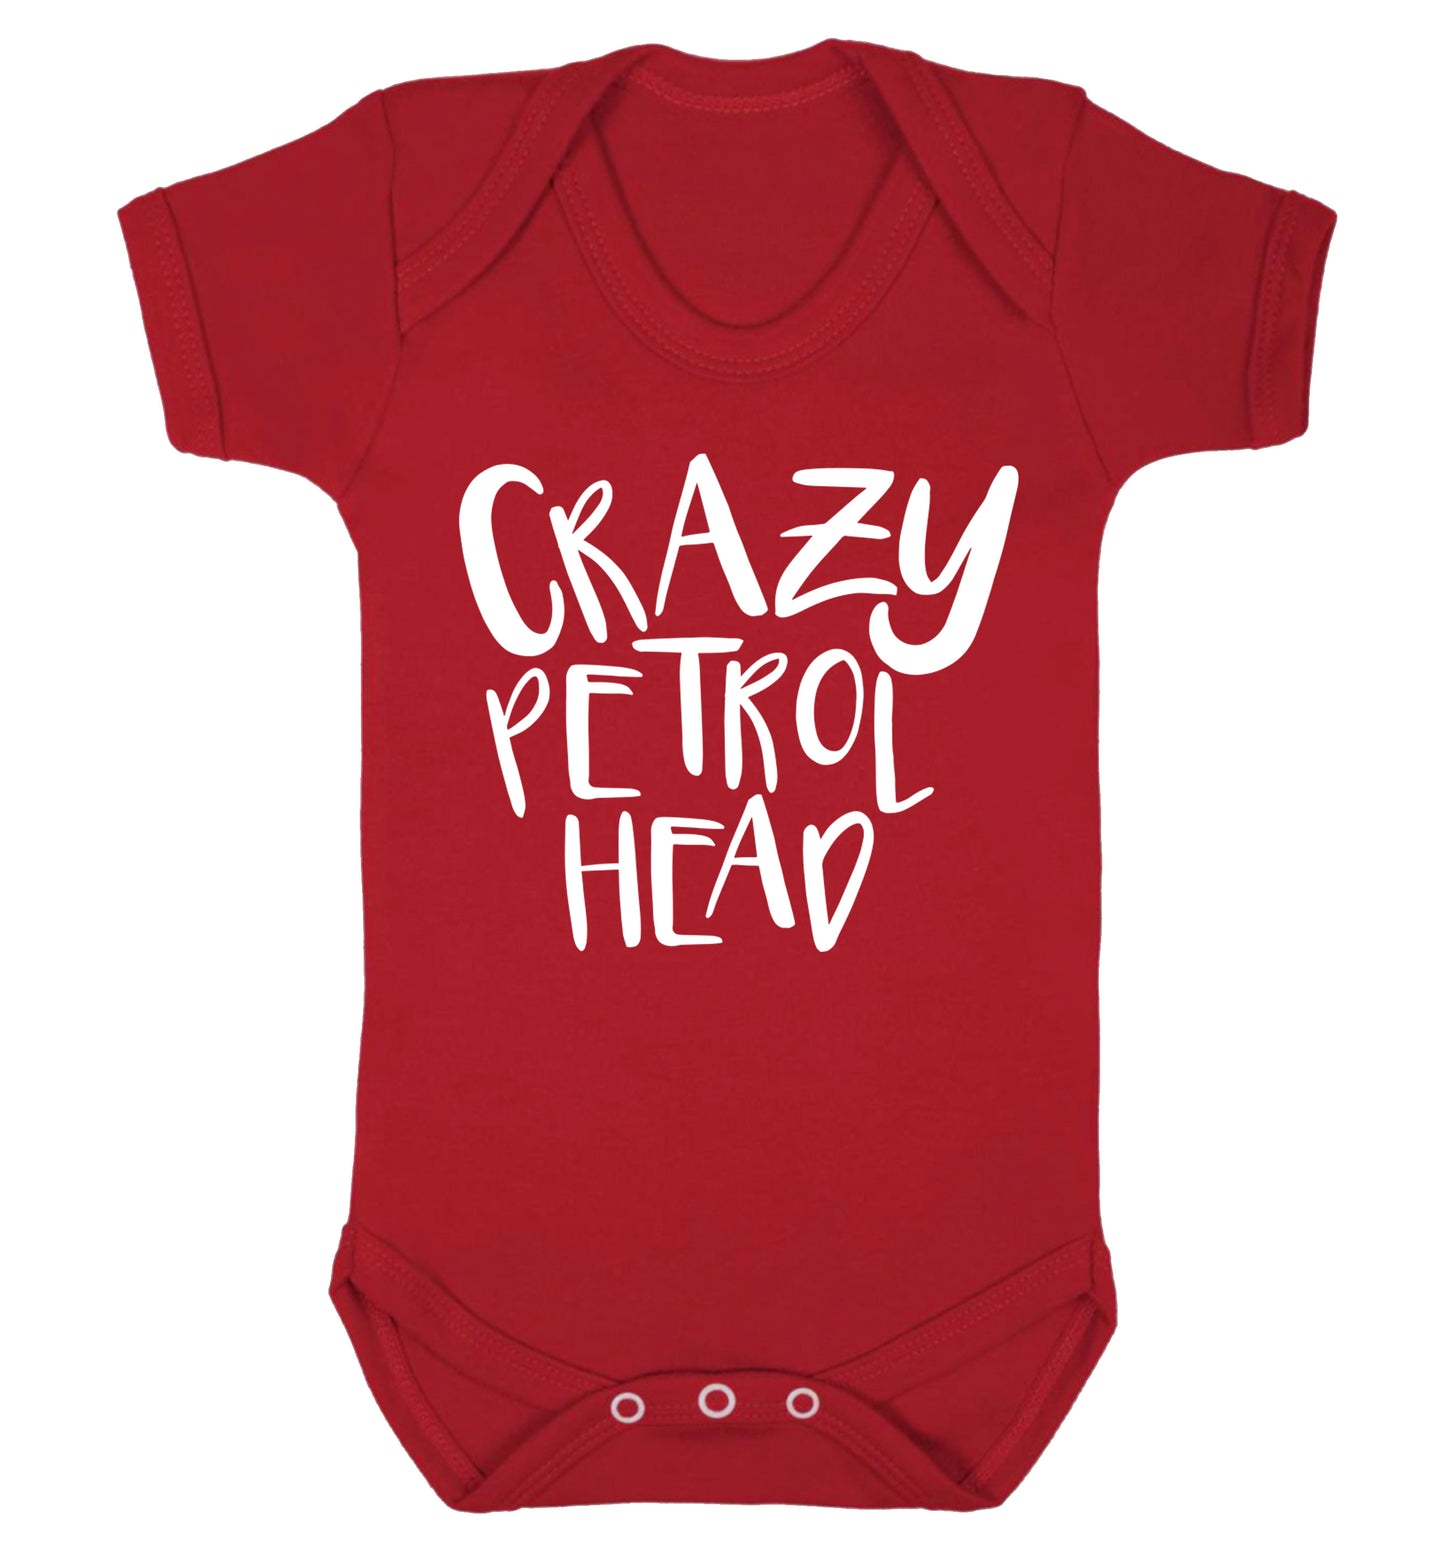 Crazy petrol head Baby Vest red 18-24 months